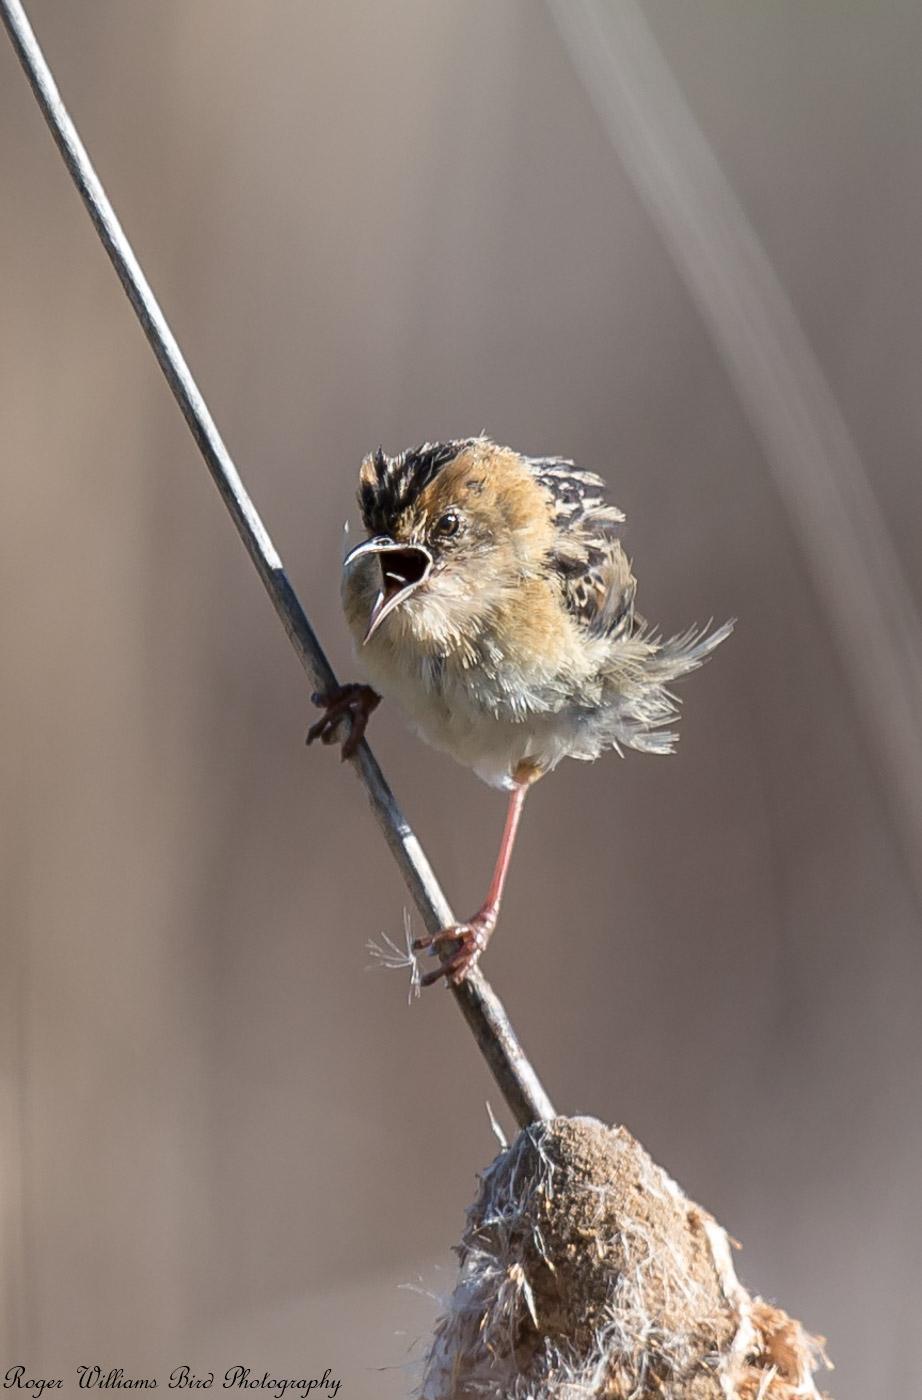 Golden-headed Cisticola Photo by Roger Williams